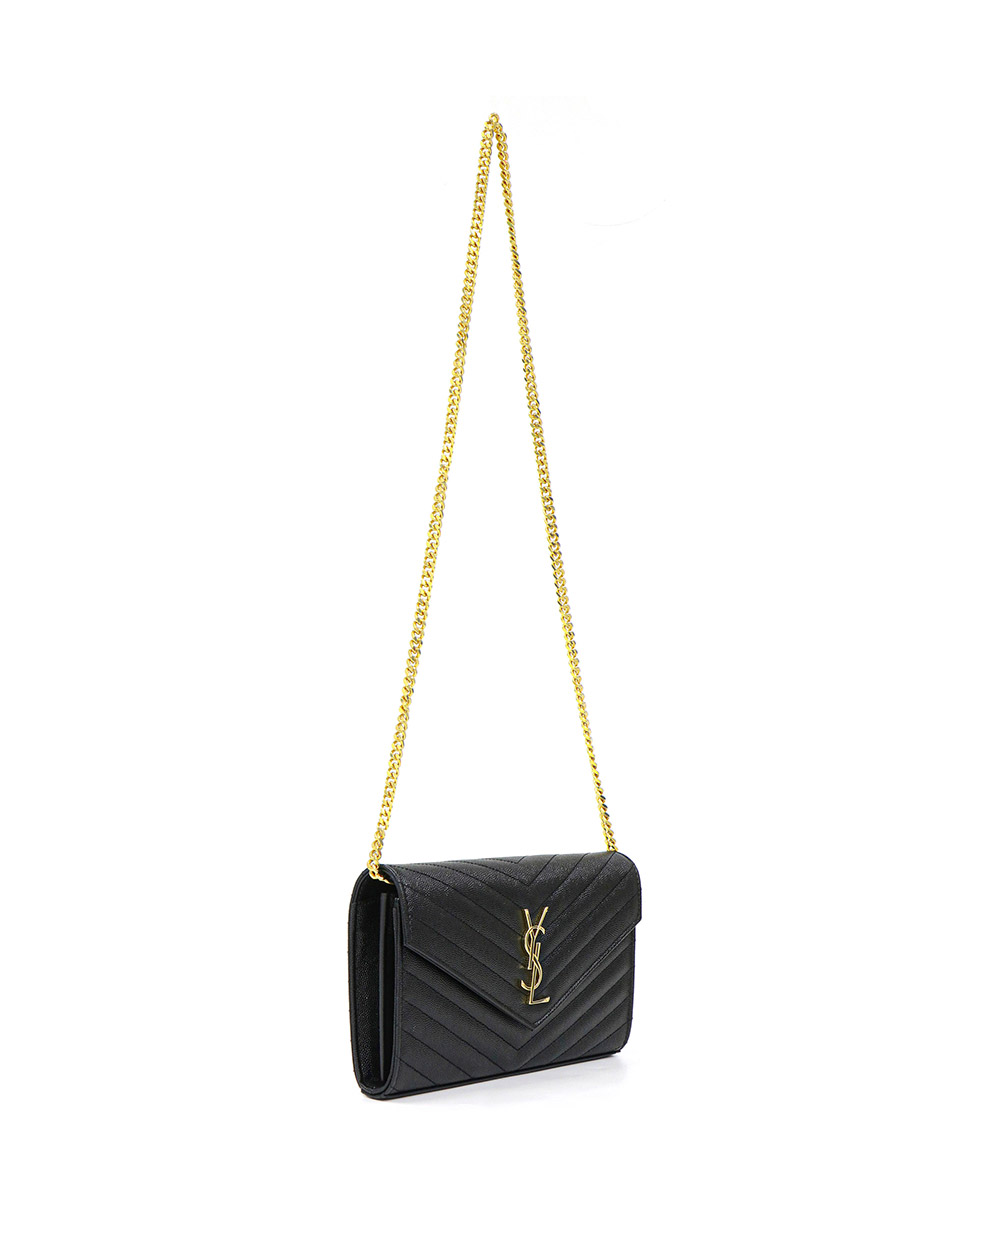 YSL BAG 377828 BOW01 1000 – Love For Lux